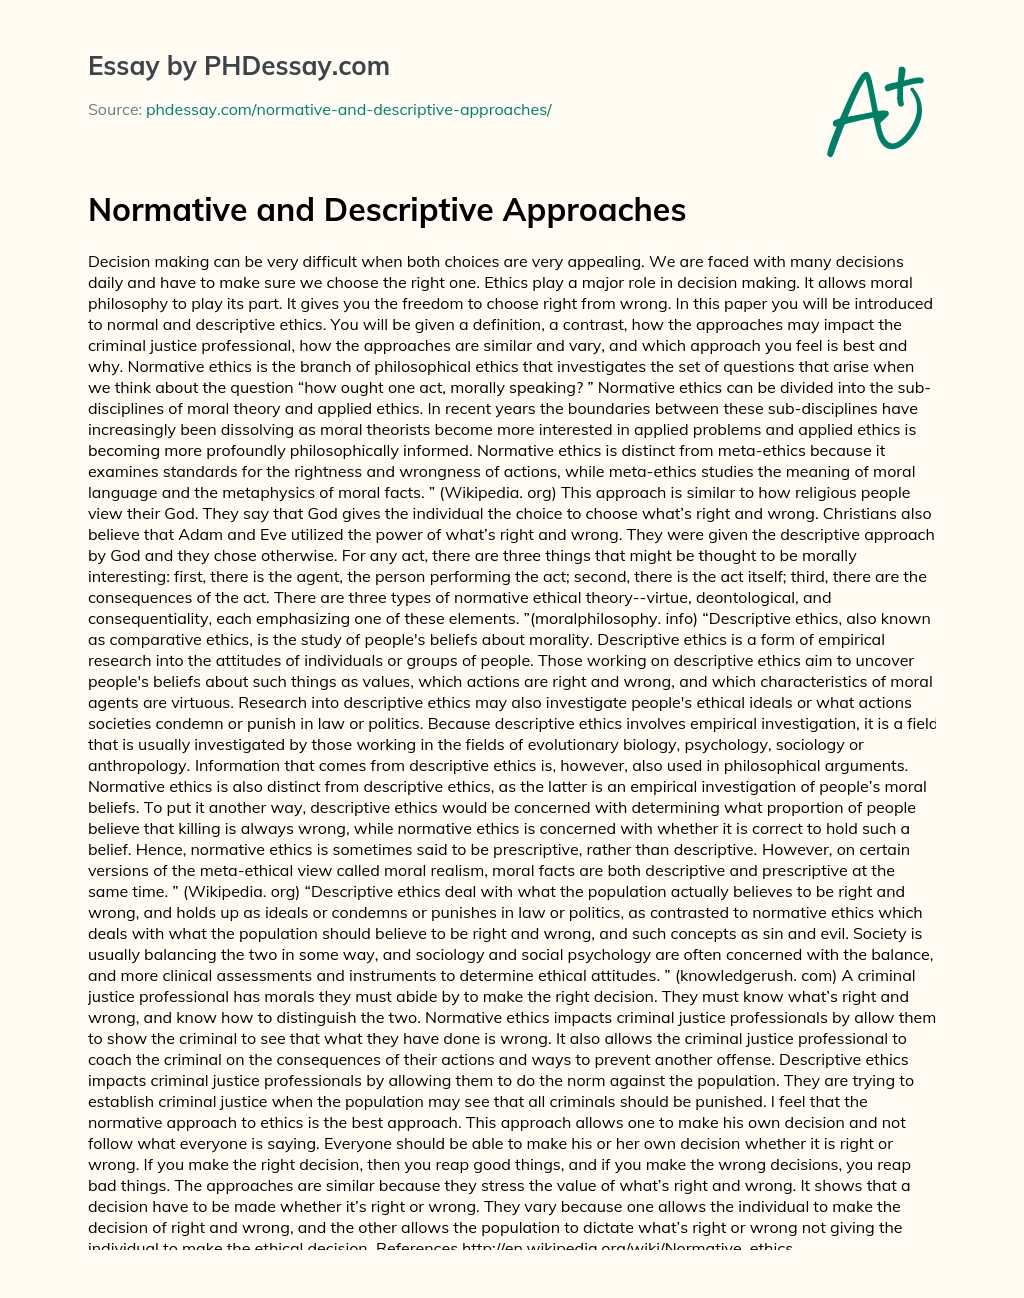 Normative and Descriptive Approaches essay